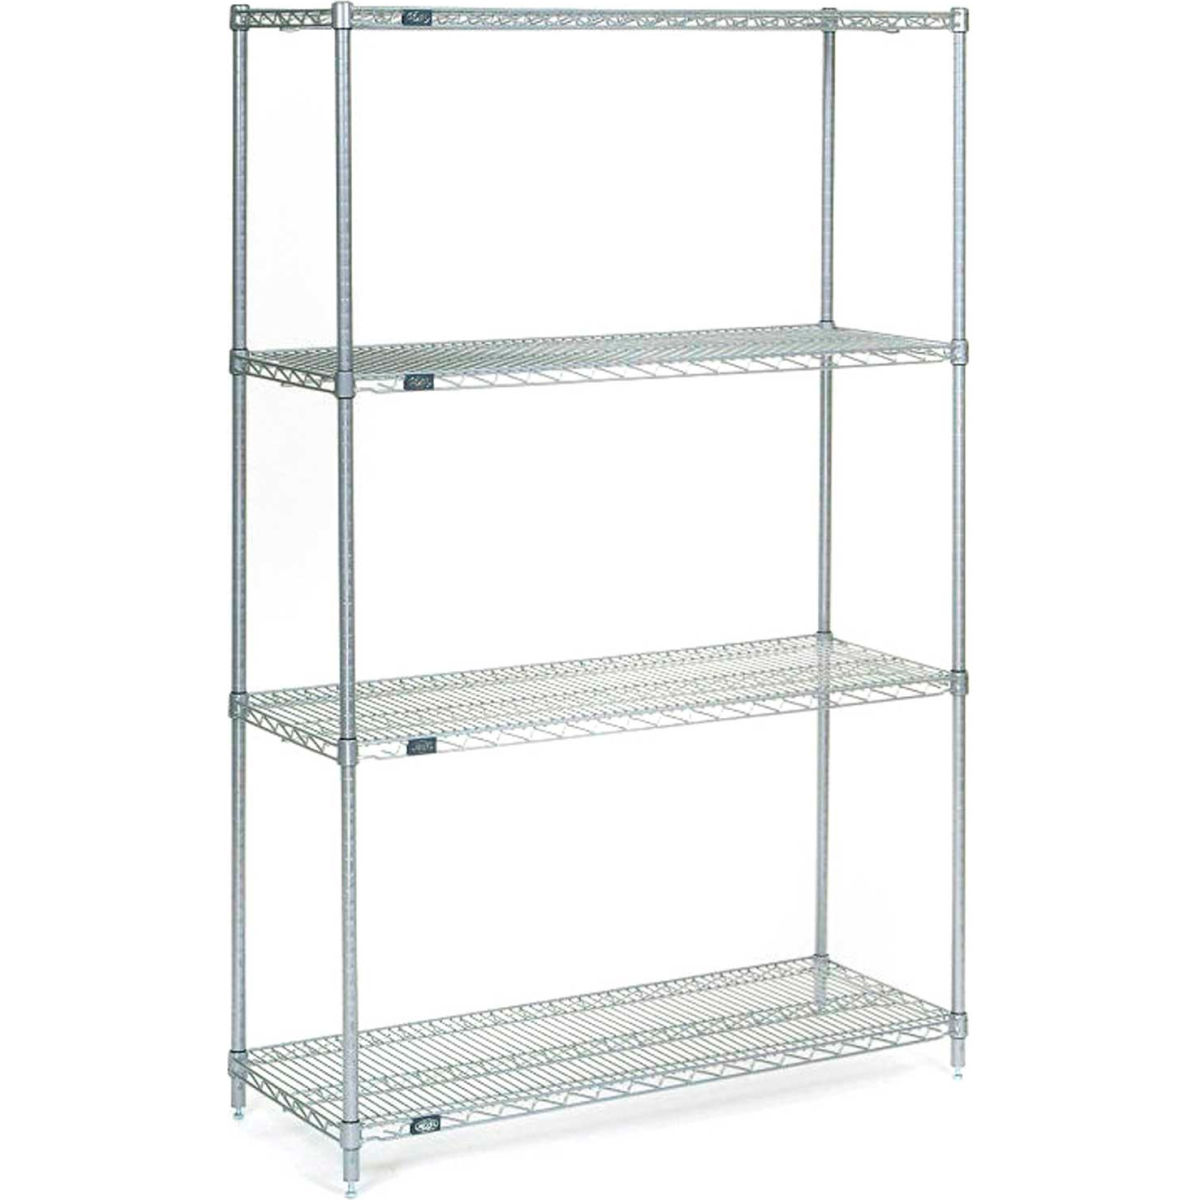 Picture of Global Industrial 14367S 74 x 36 x 14 in. Nexel Stainless Steel Starter Wire Shelving